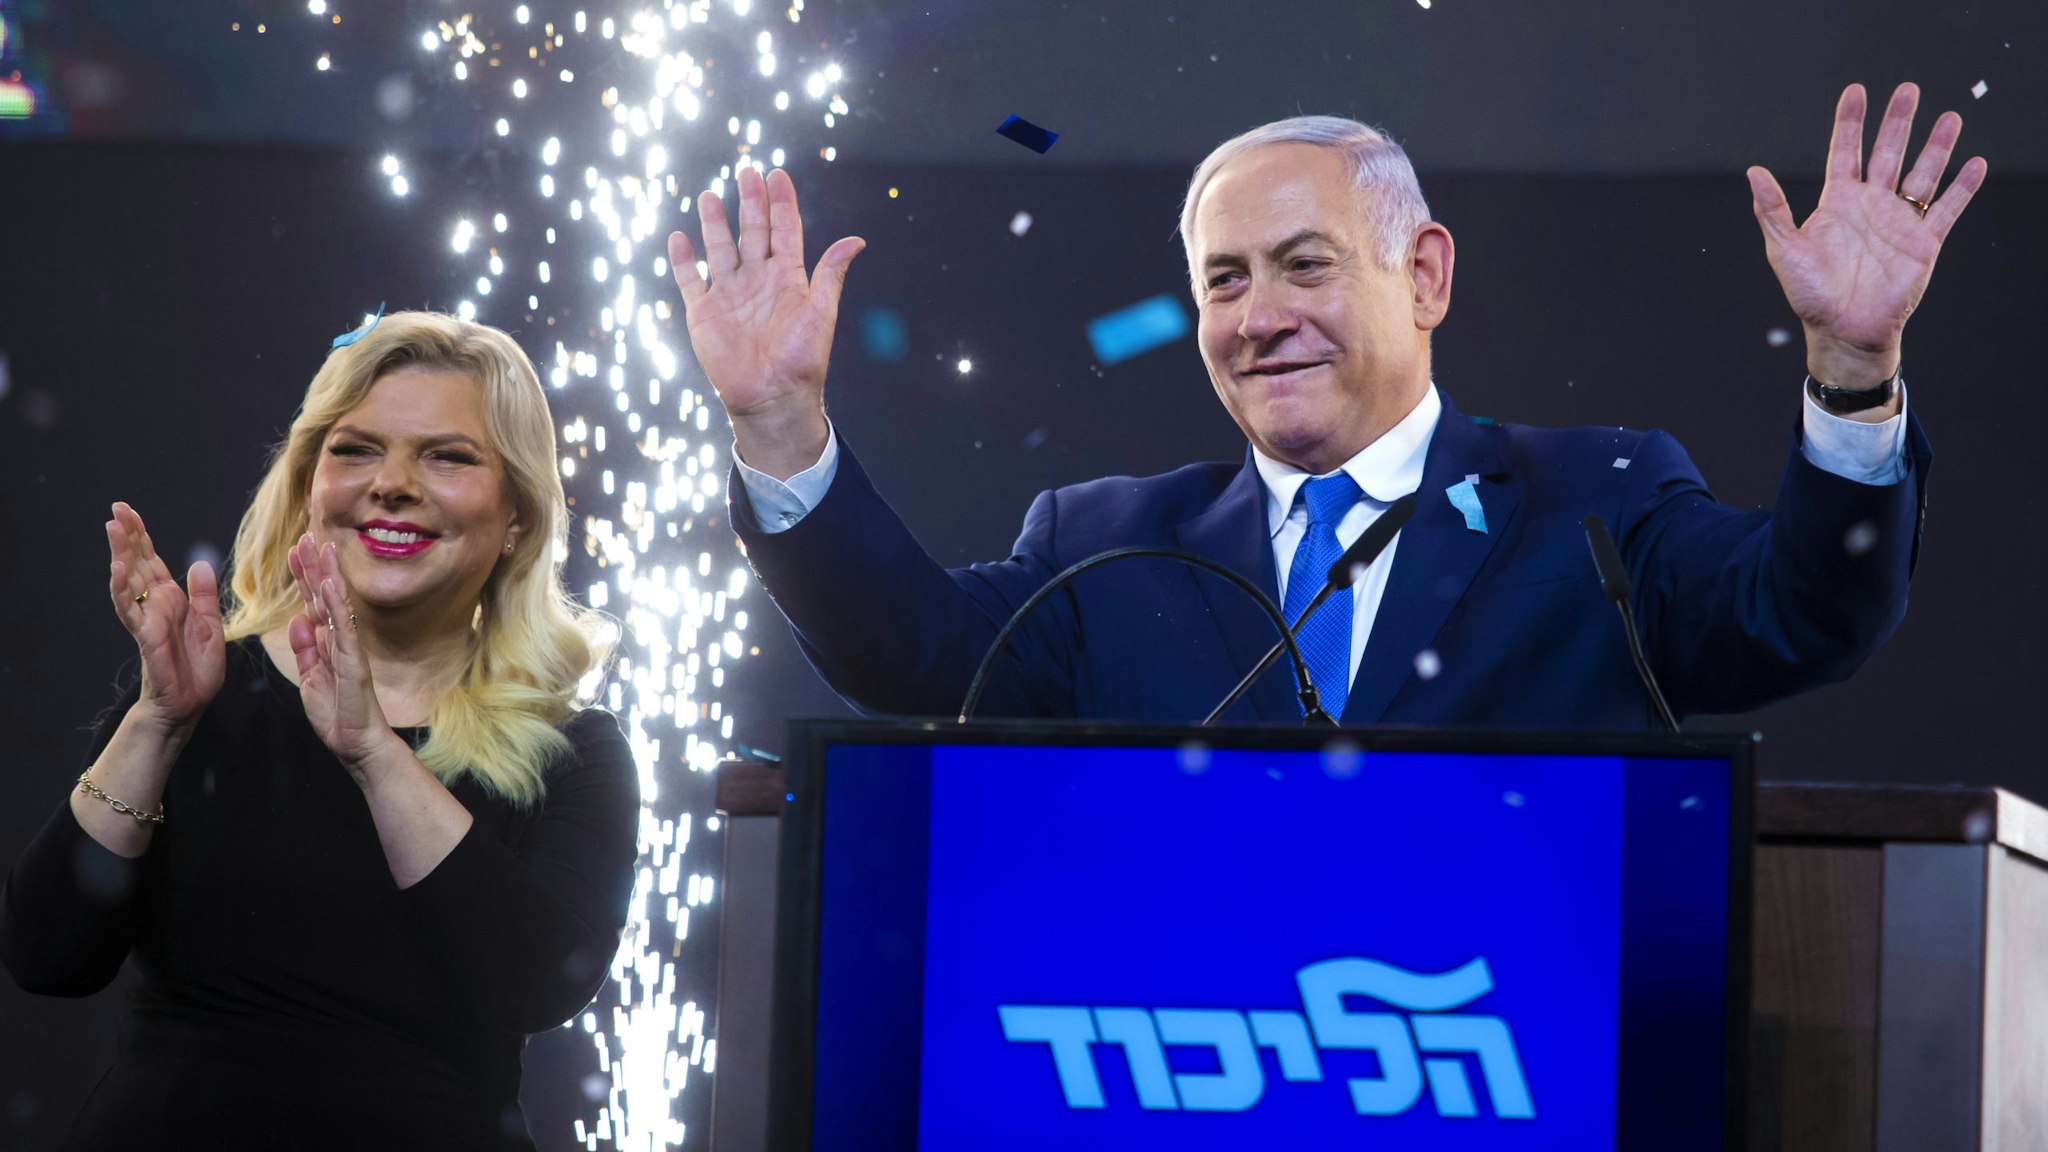 TEL AVIV, ISRAEL - APRIL 10: Prime Minster of Israel, Benjamin Netanyahu and his wife, Sara greet supporters during his after vote speech on April 10, 2019 in Tel Aviv, Israel. Prime Minister Benjamin Netanyahu and Blue and White leader Benny Gantz each declared that they won Tuesday's election after inconclusive exit polls were broadcast on the three Israeli networks.